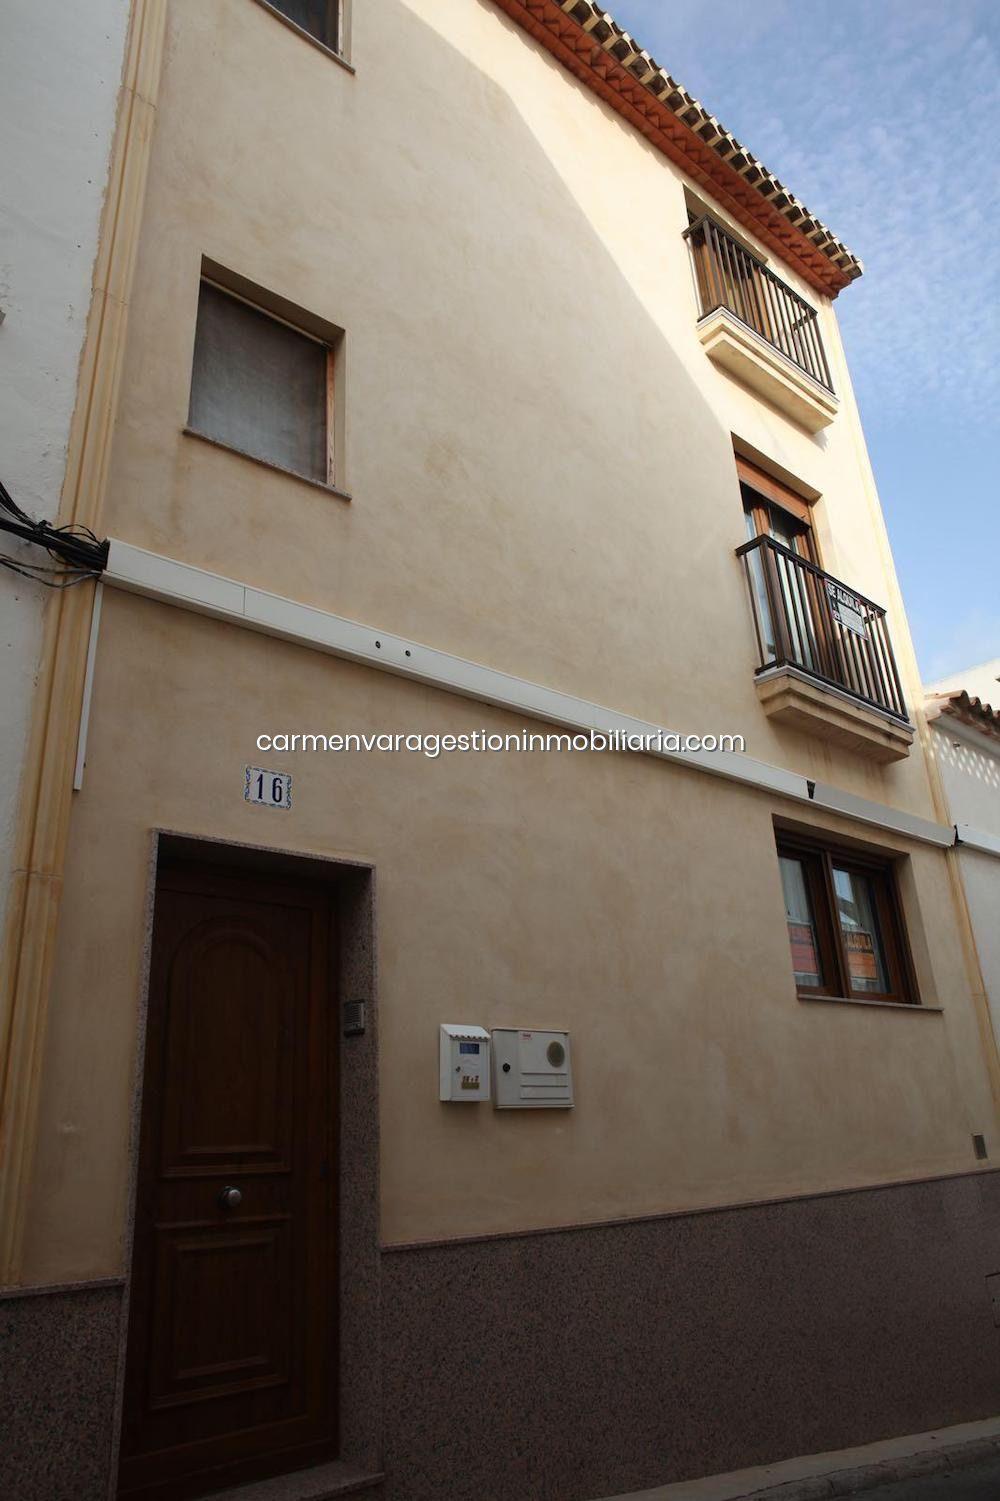 SALE OF TOWN HOUSE IN XABIA.